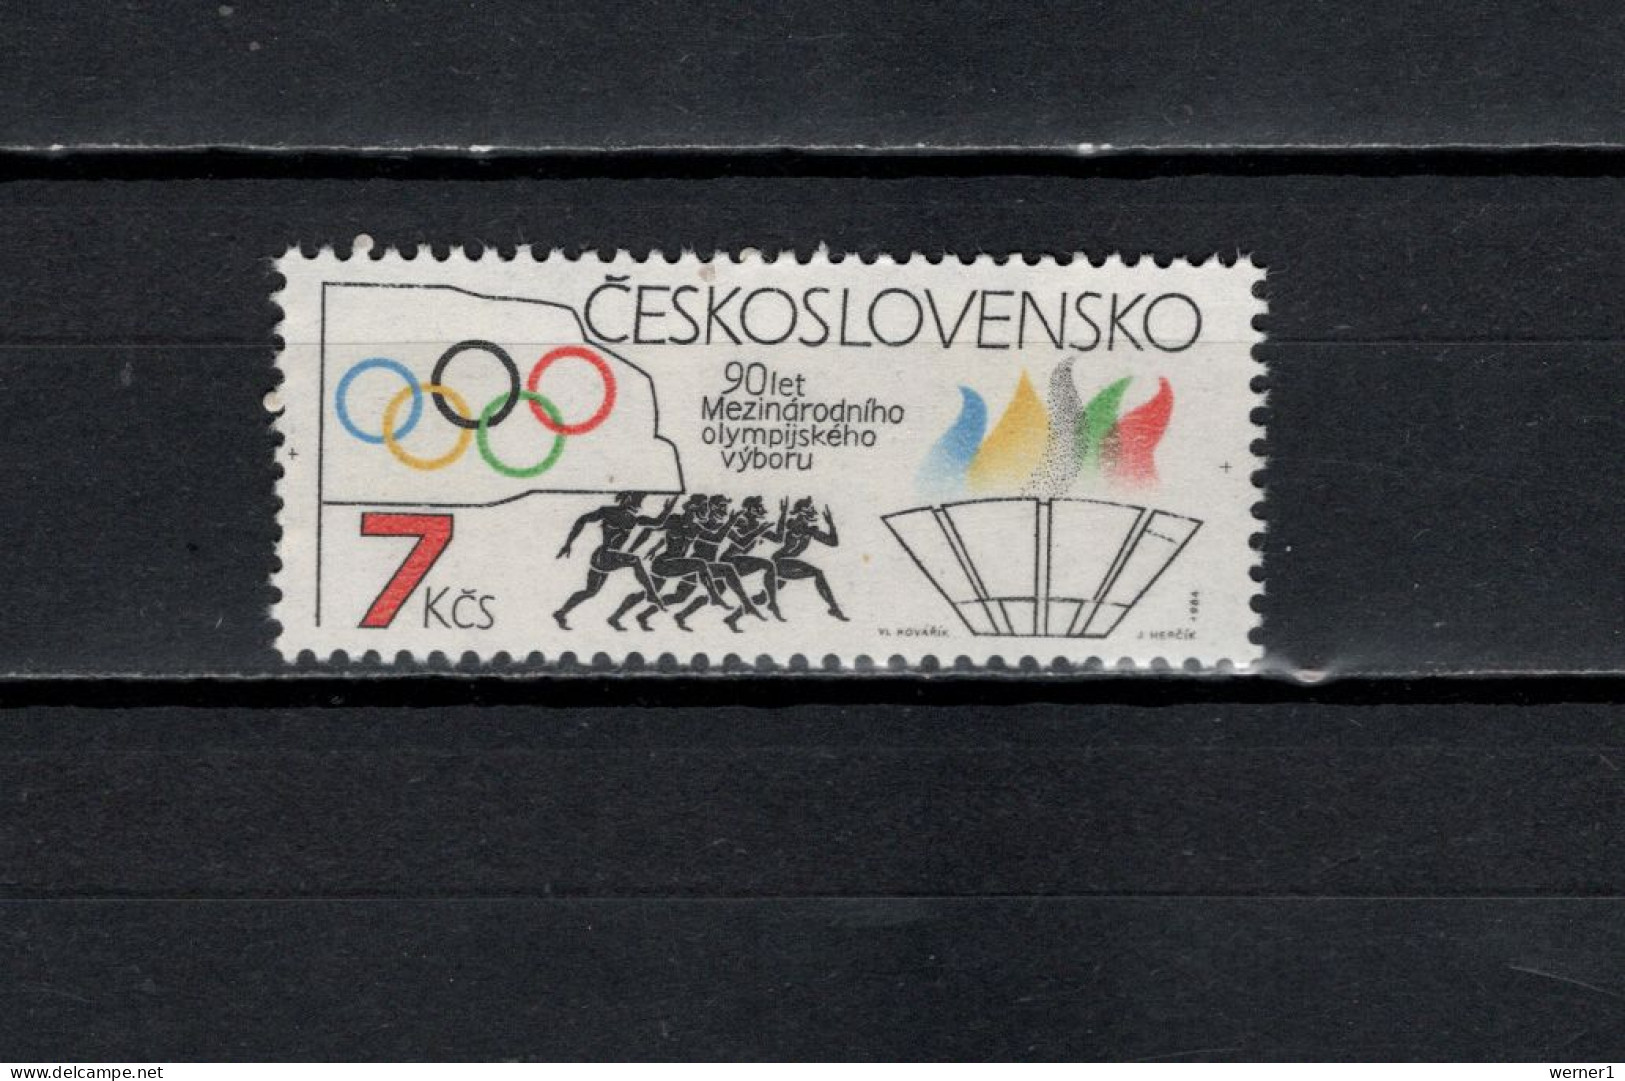 Czechoslovakia 1984 Olympic Games Stamp MNH - Ete 1984: Los Angeles